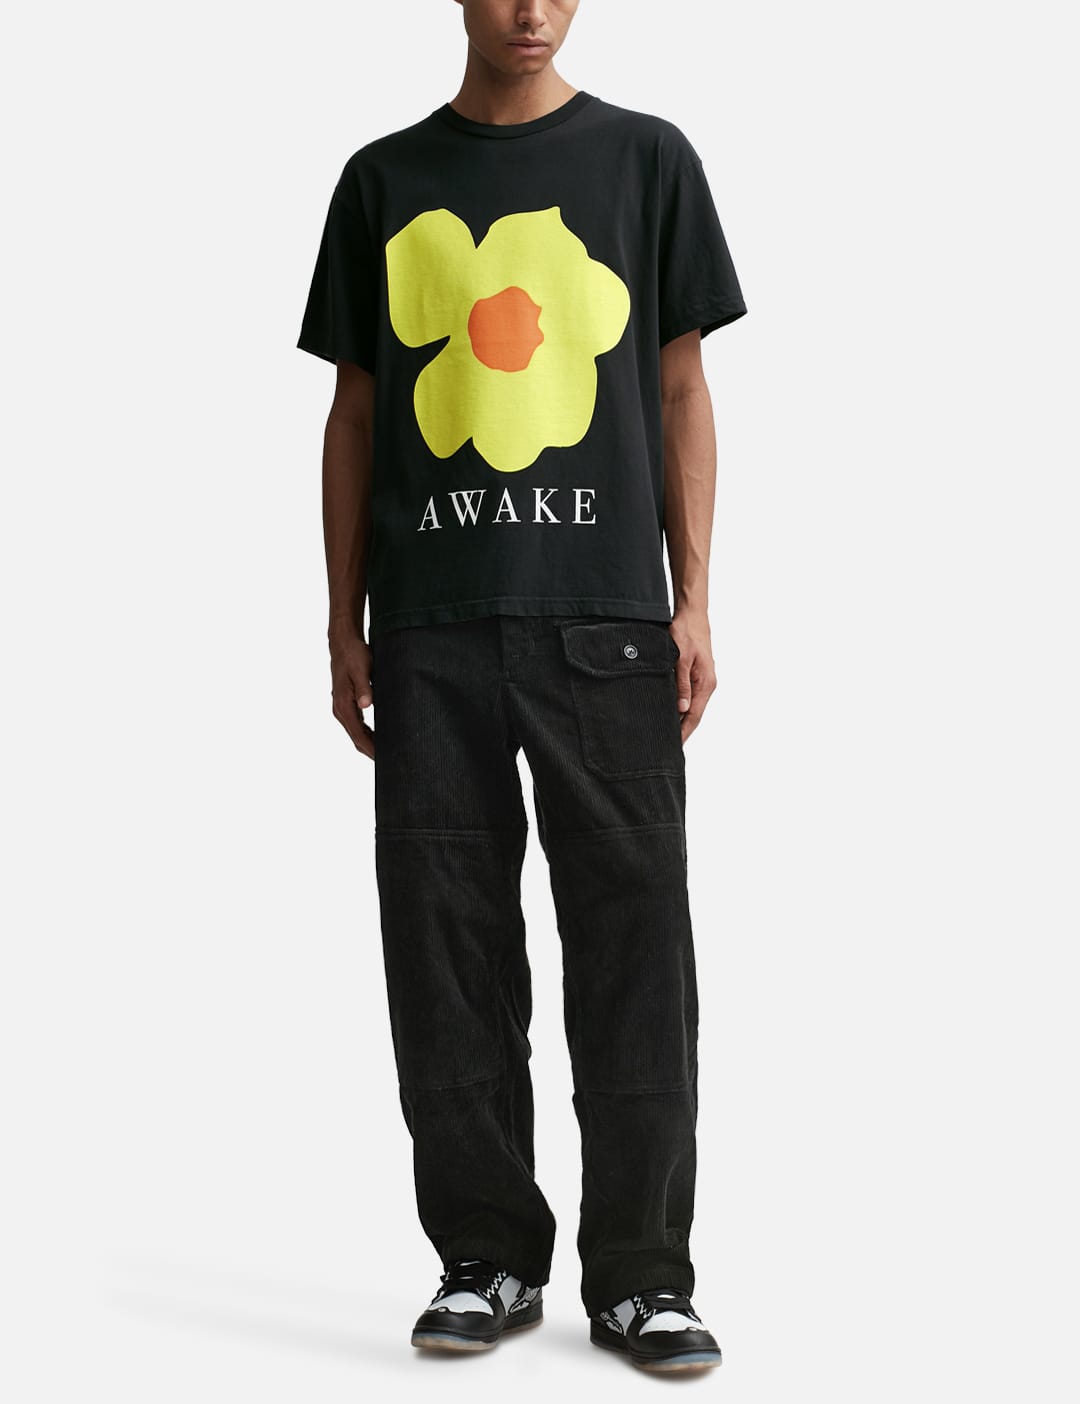 Awake NY - Floral T-shirt | HBX - Globally Curated Fashion and 